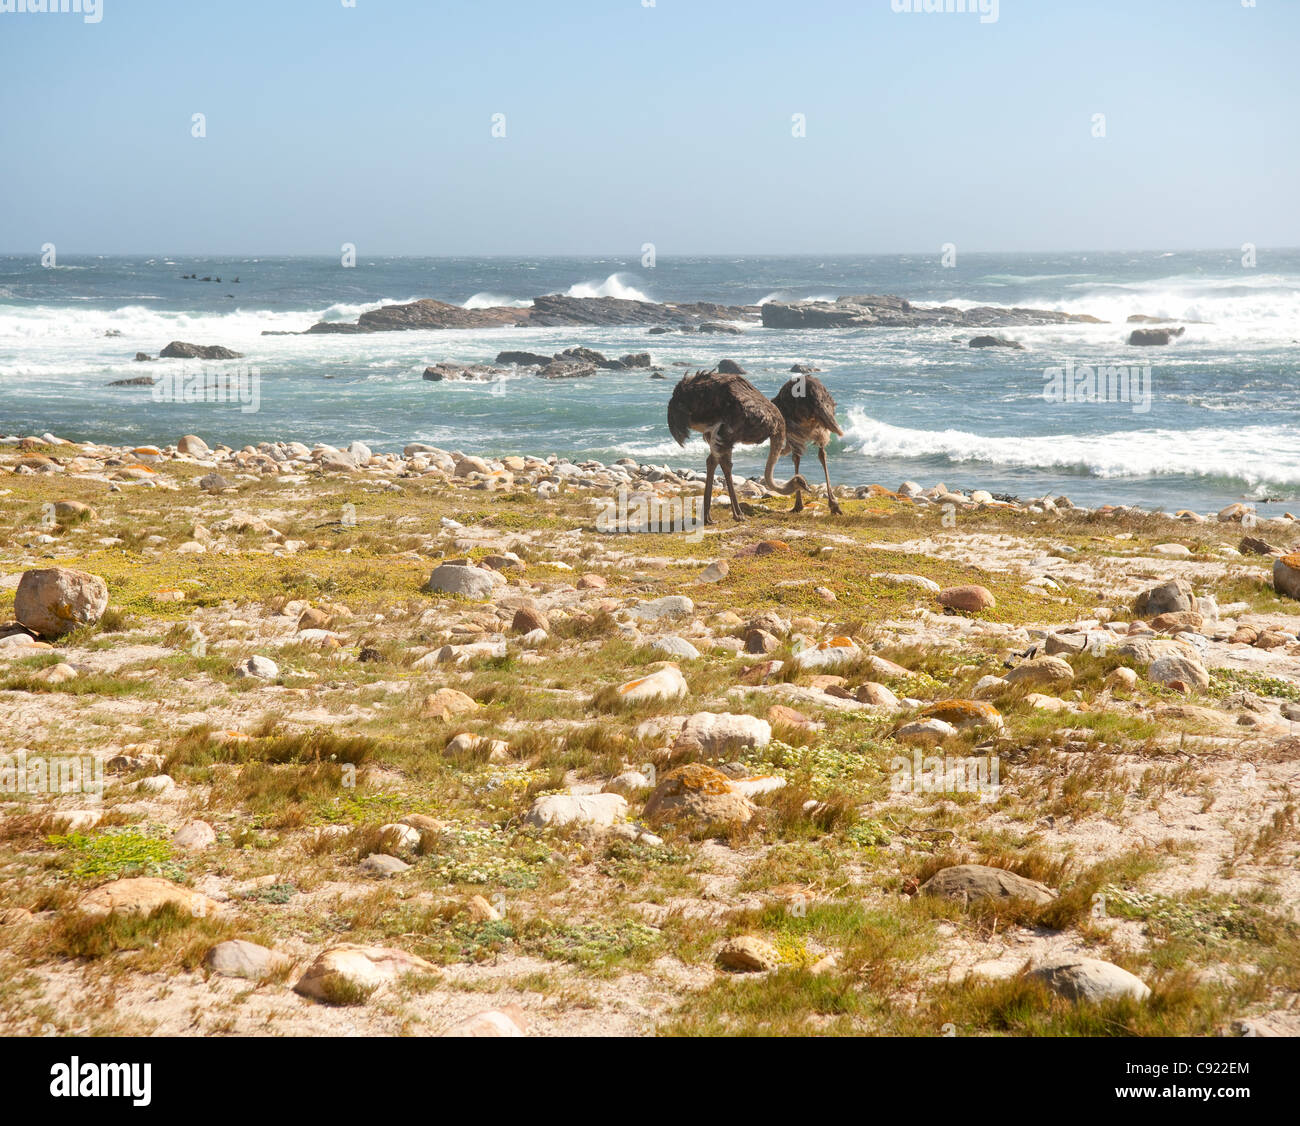 Wild Ostriches can be found all over the Cape Point national park and are often found foraging next to the  beaches near the Stock Photo